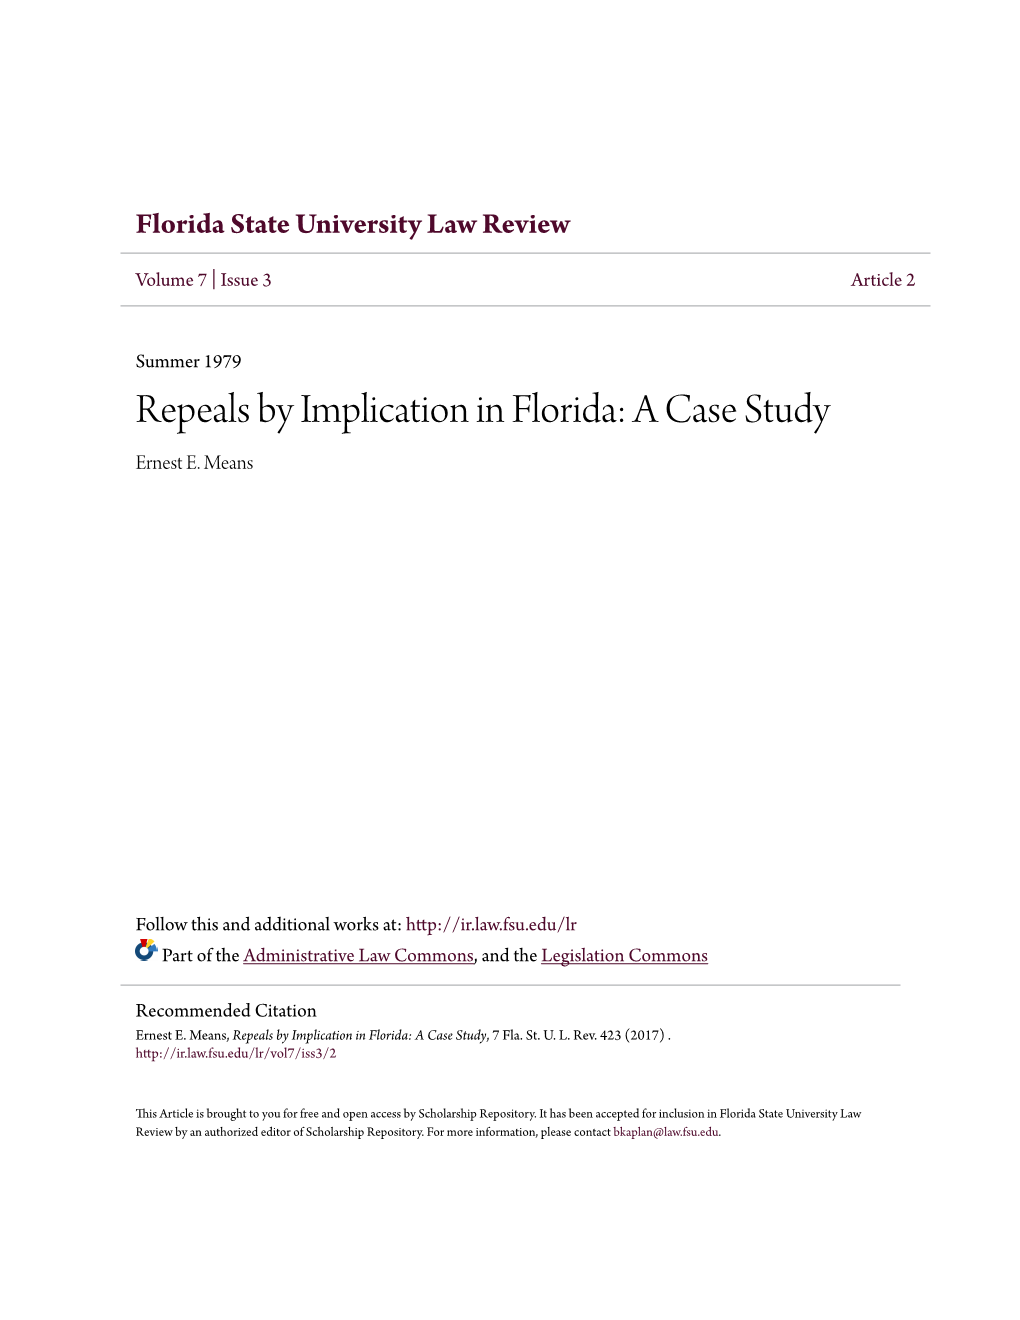 Repeals by Implication in Florida: a Case Study Ernest E